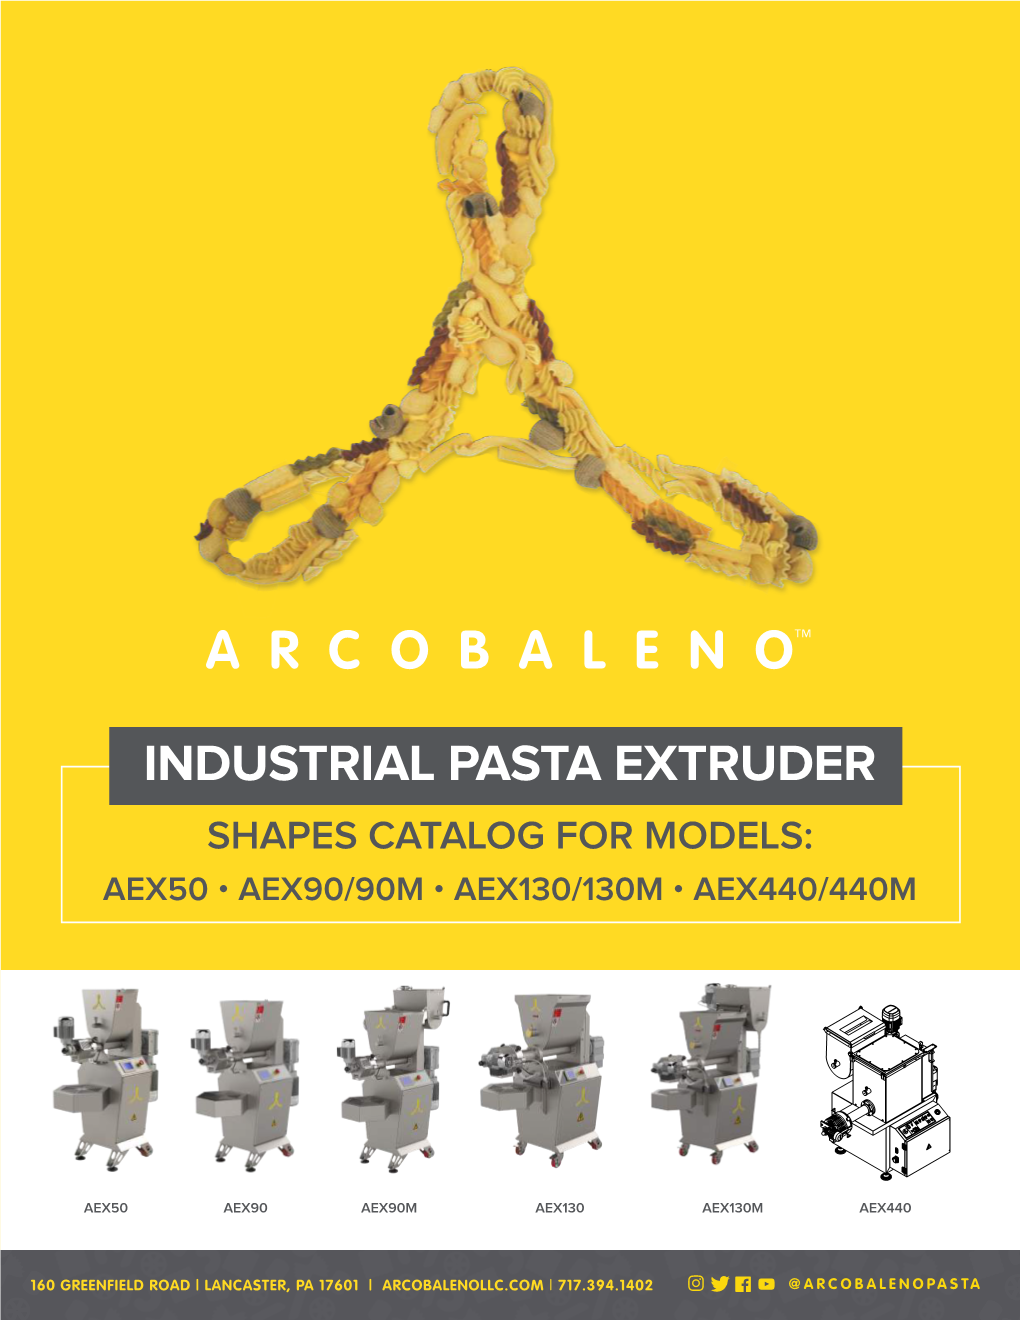 Industrial Pasta Extruder Shapes Catalog for Models: Aex50 • Aex90/90M • Aex130/130M • Aex440/440M